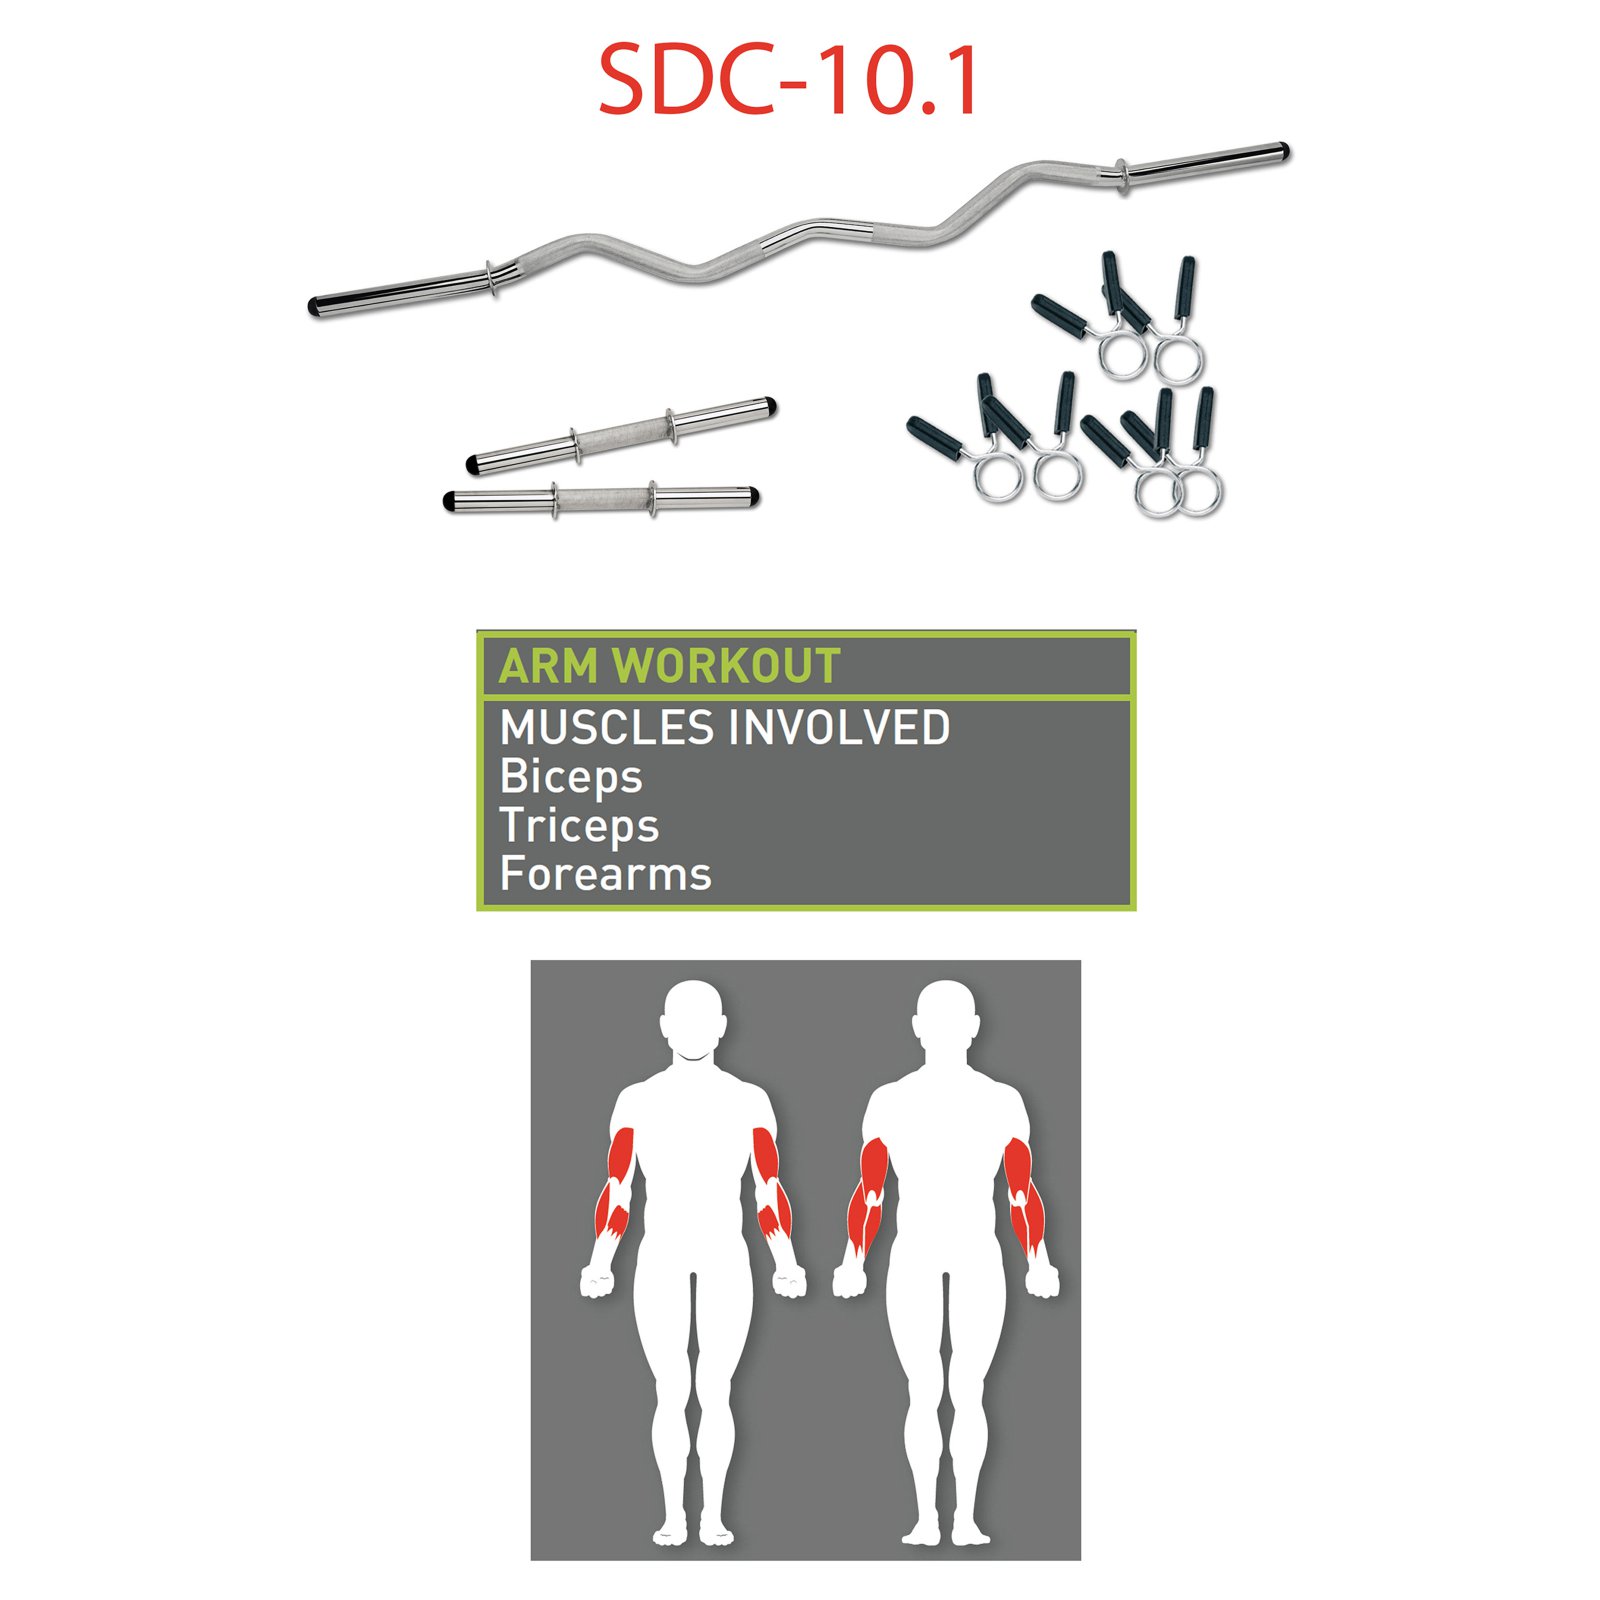 Marcy Impex Standard Curl Bar/Dumbbell Handle Combo: SDC-10.1 - image 1 of 5